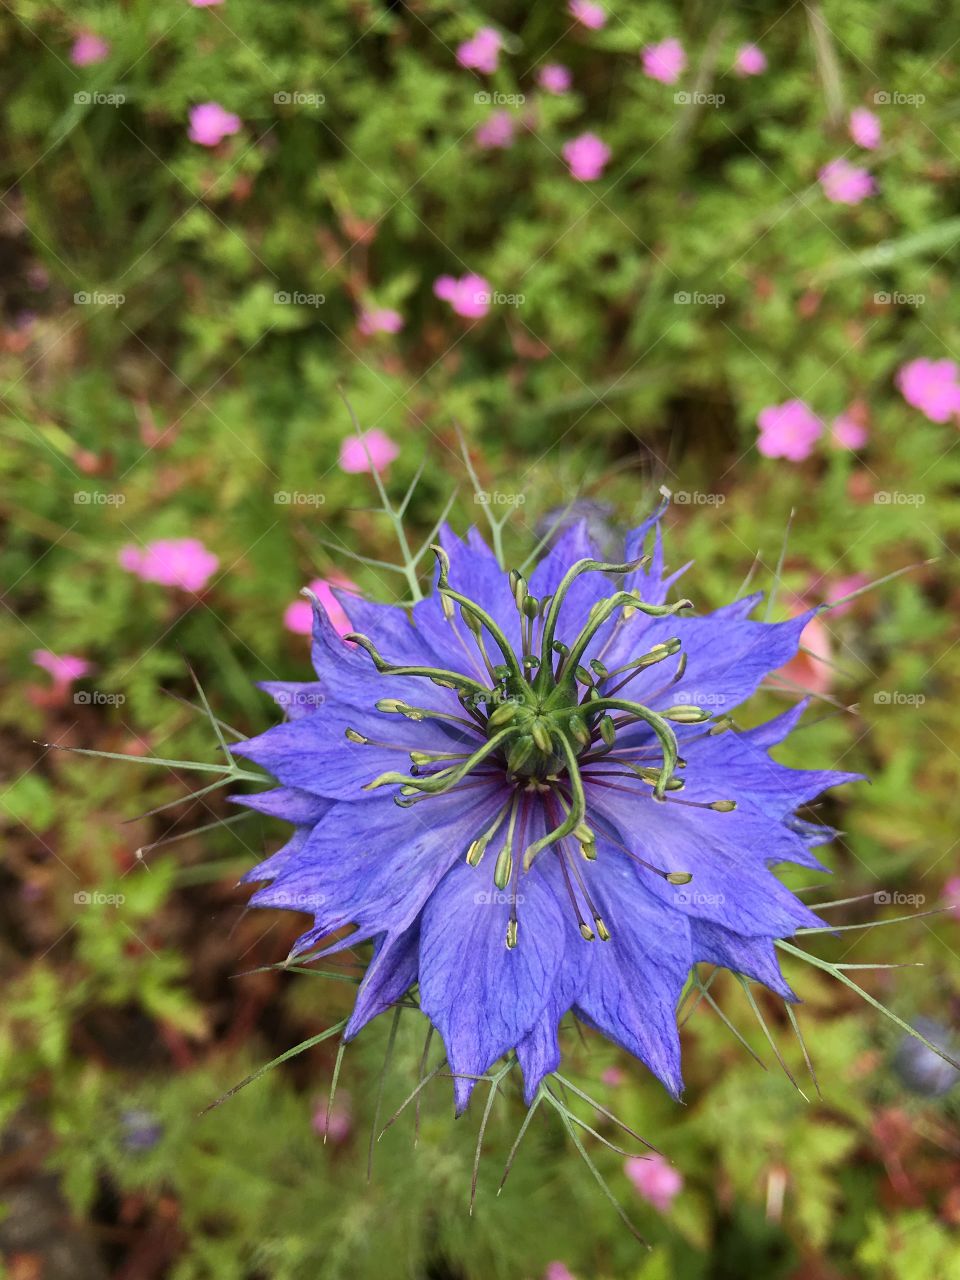 Close up view of pretty deep blue Love-in-mist flower (Nigella) with tiny pink Herb Robert cranesbill flowers in the background in the garden 